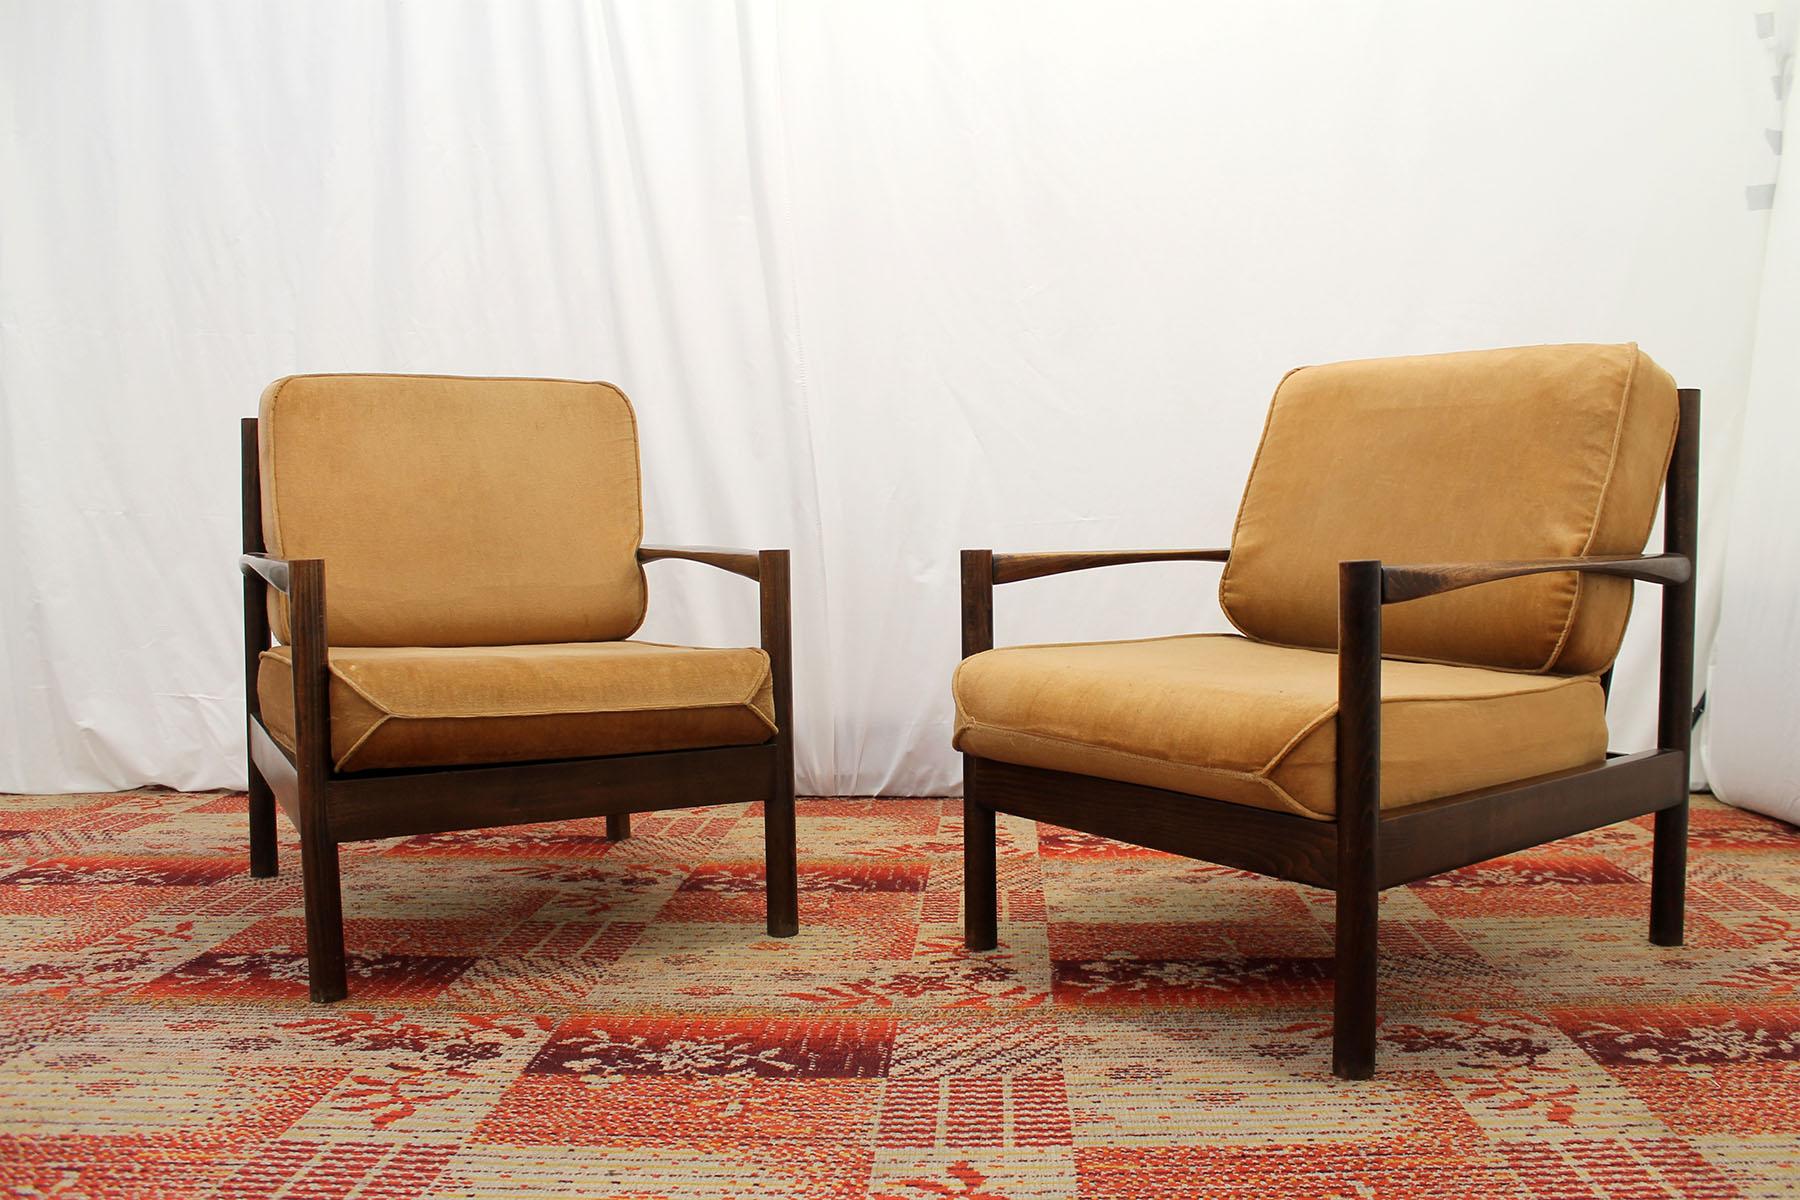 Vintage scandinavian style armchairs, made in the 1980´s in the former Czechoslovakia. The structure is made of beech wood. The wooden structure and also the upholstery are in good Vintage condition, showing signs of age and using.

Price is for